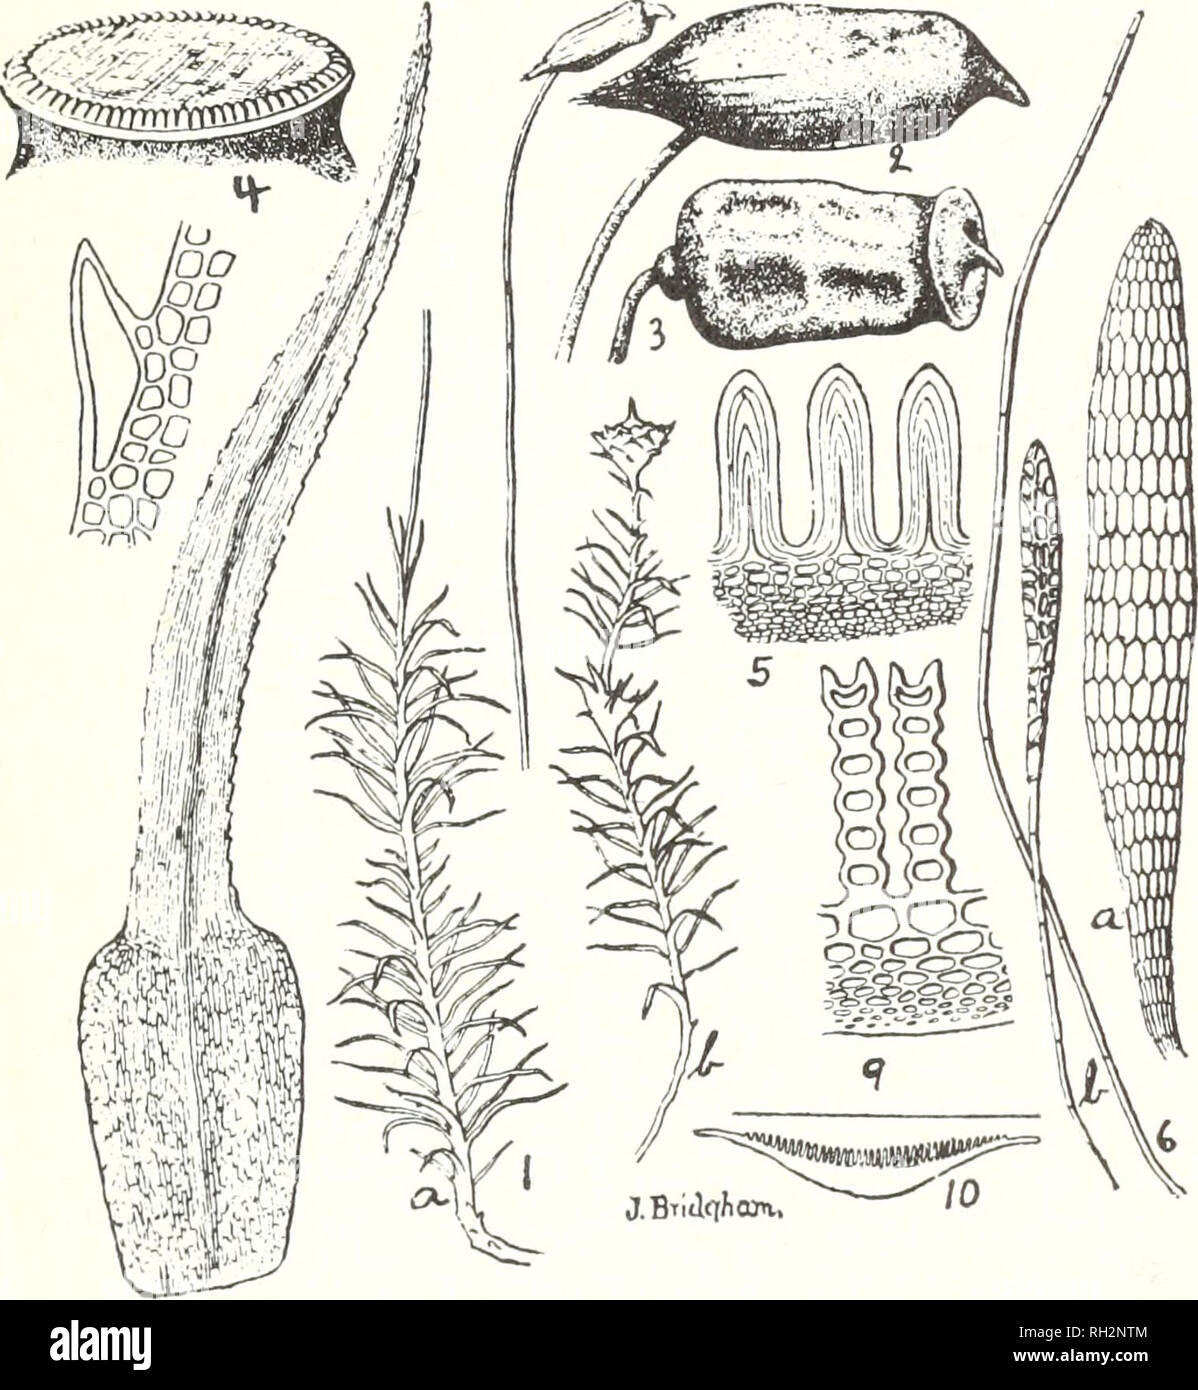 . The Bryologist. Bryology; Bryology -- Periodicals. -19-. FOl.YTRICHUM COMMUNE L. I.—Male and female plants, about one-half natural size. 2 and 3.—Capsules with and without calyptra. 4.—Mouth of capsule, enlarged. 5.—Teeth of peri- stome, greatly enlarged. 6.—Antheridium and paraphyses, greath' enlarged. -Leaf, enlarged. 8.—Margin of leaf enlarged to show tooth and cells. 10.—Cross-section of leaf to show laniellie on upper surface. — l.ainellce, greatly enlarged. Taken by permission from Mrs. E. G. Britton's &quot;Mosses of the Eastern United States.&quot; (in preparation). ridium (fig. 6).  Stock Photo